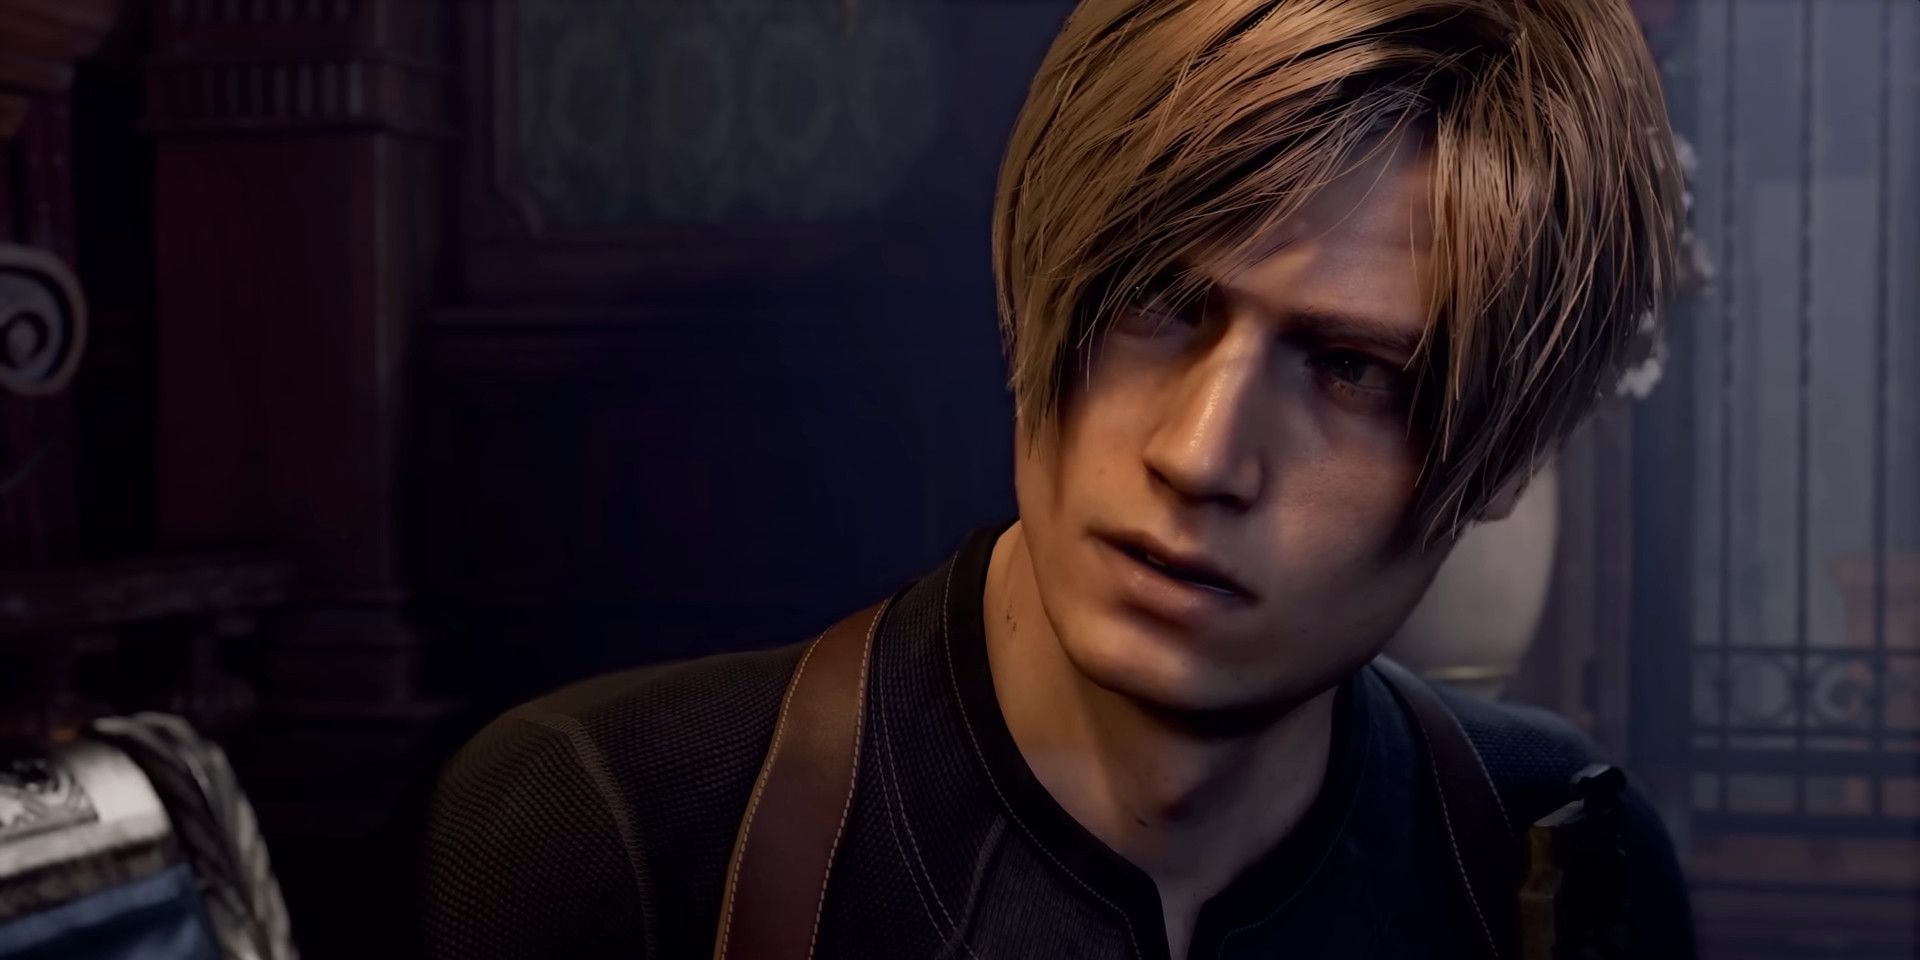 Resident Evil 4 remake has a fun little ARG that makes you a